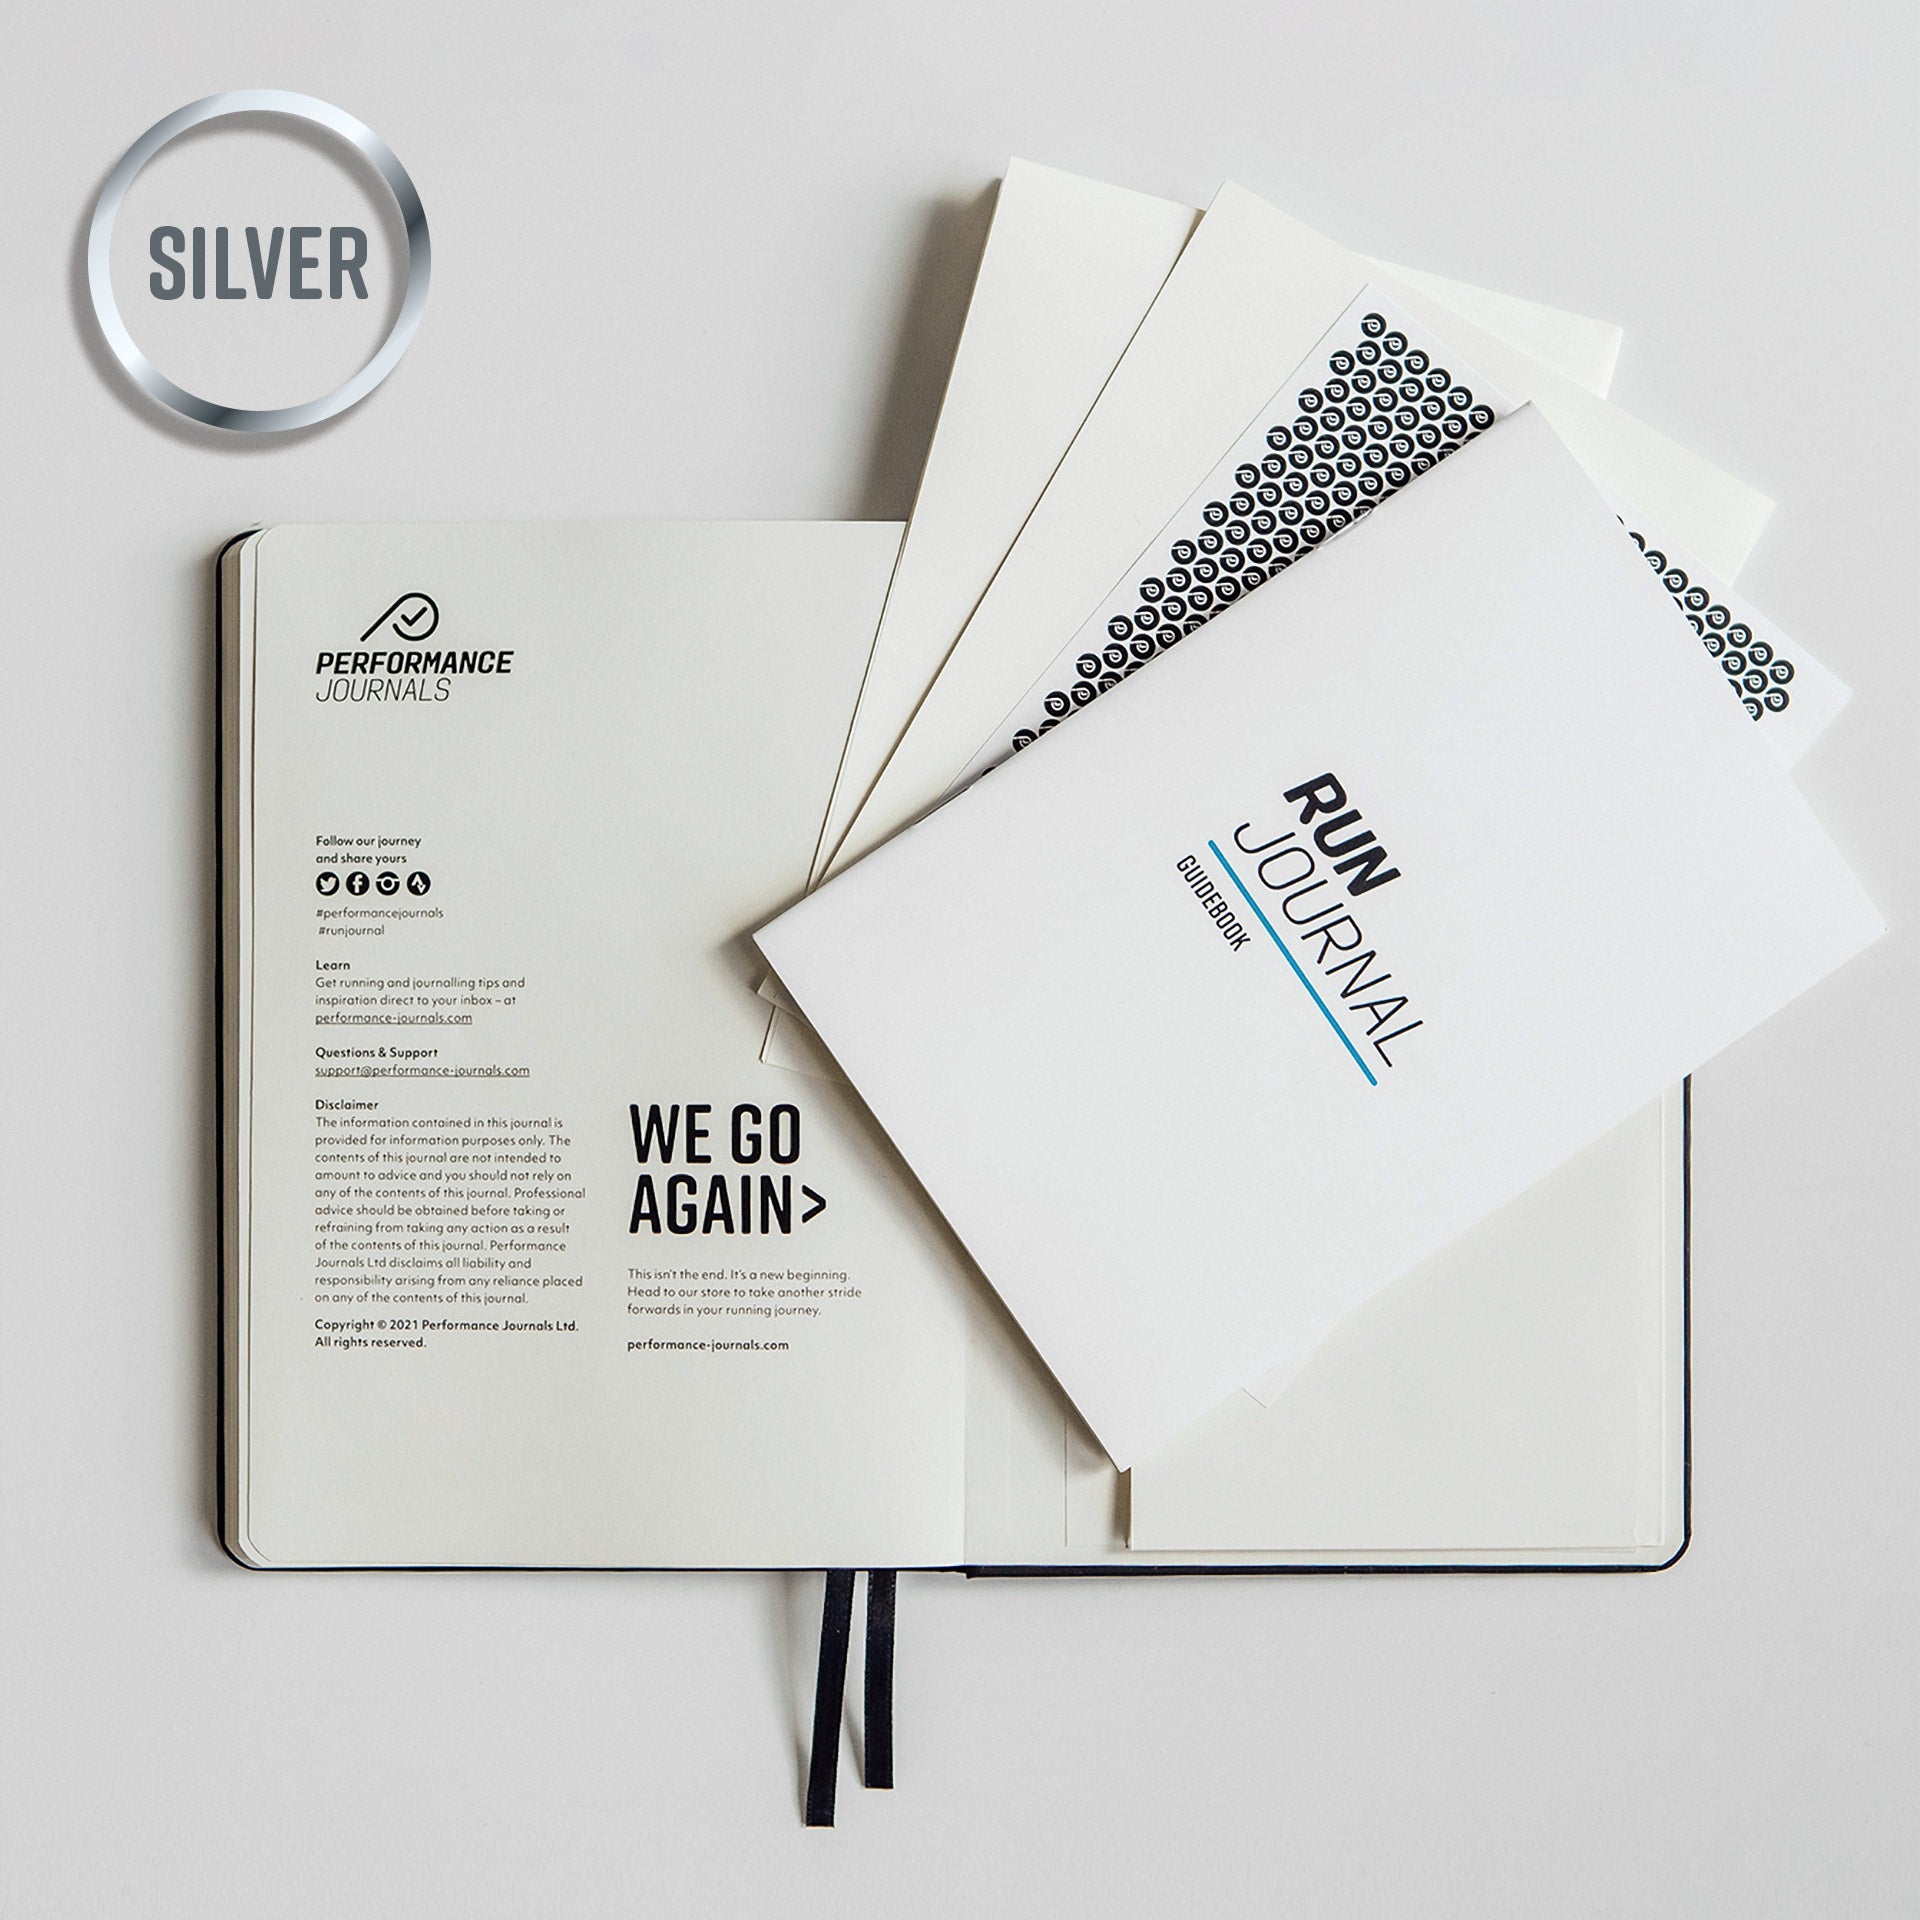 The Run Journal Silver package